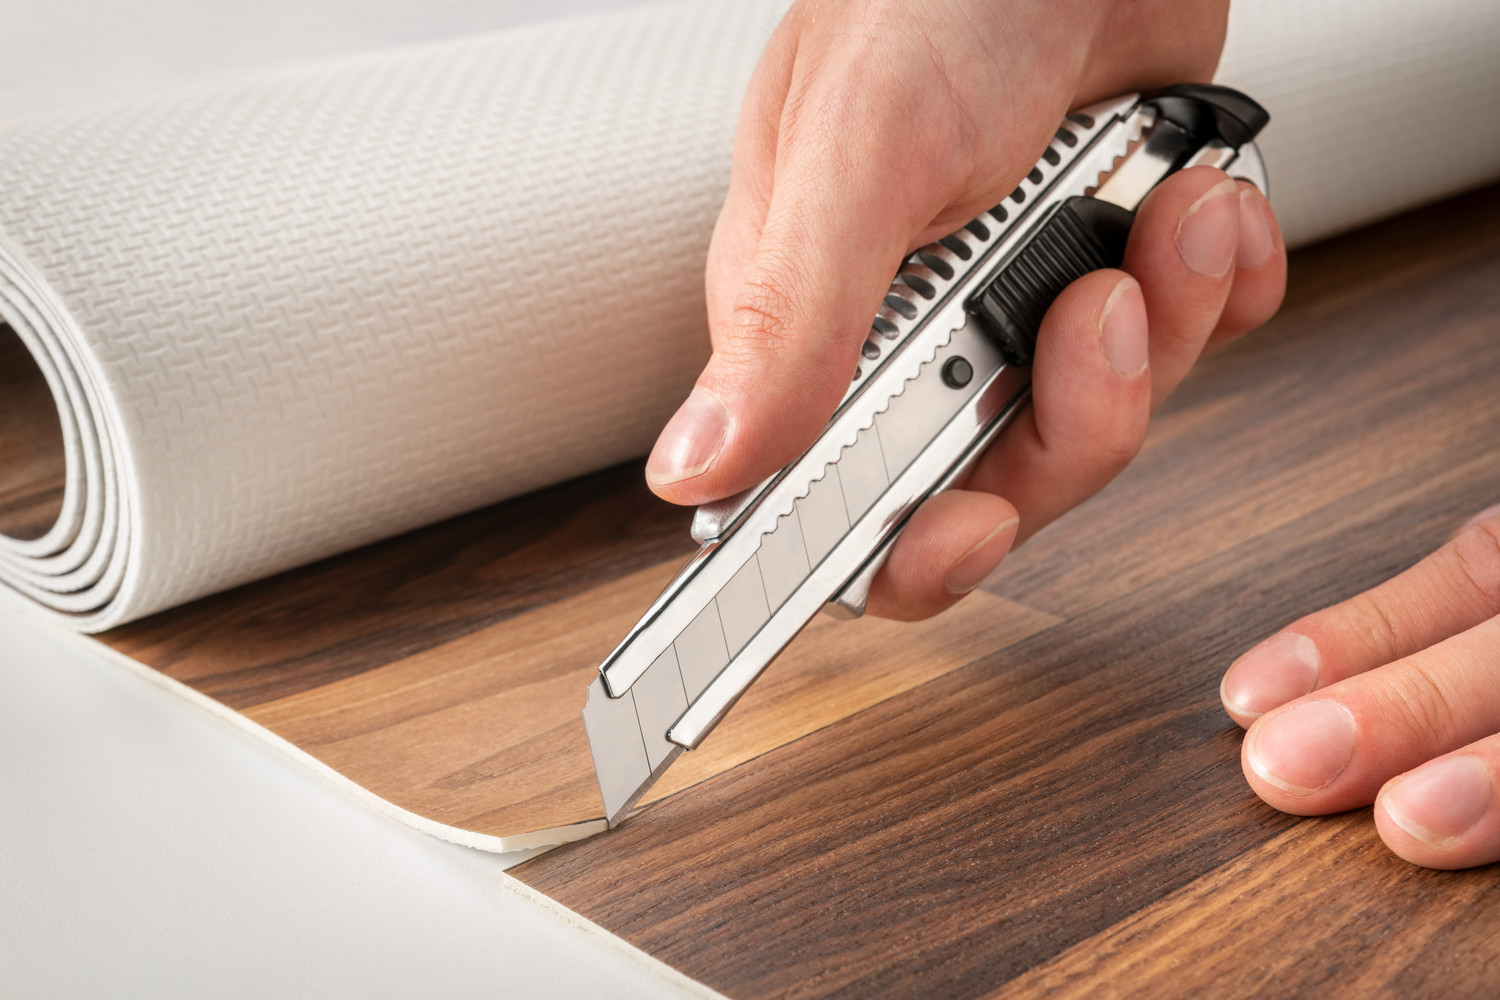 DAHLE Professional cutters are perfect for DIY enthusiasts and tradespeople